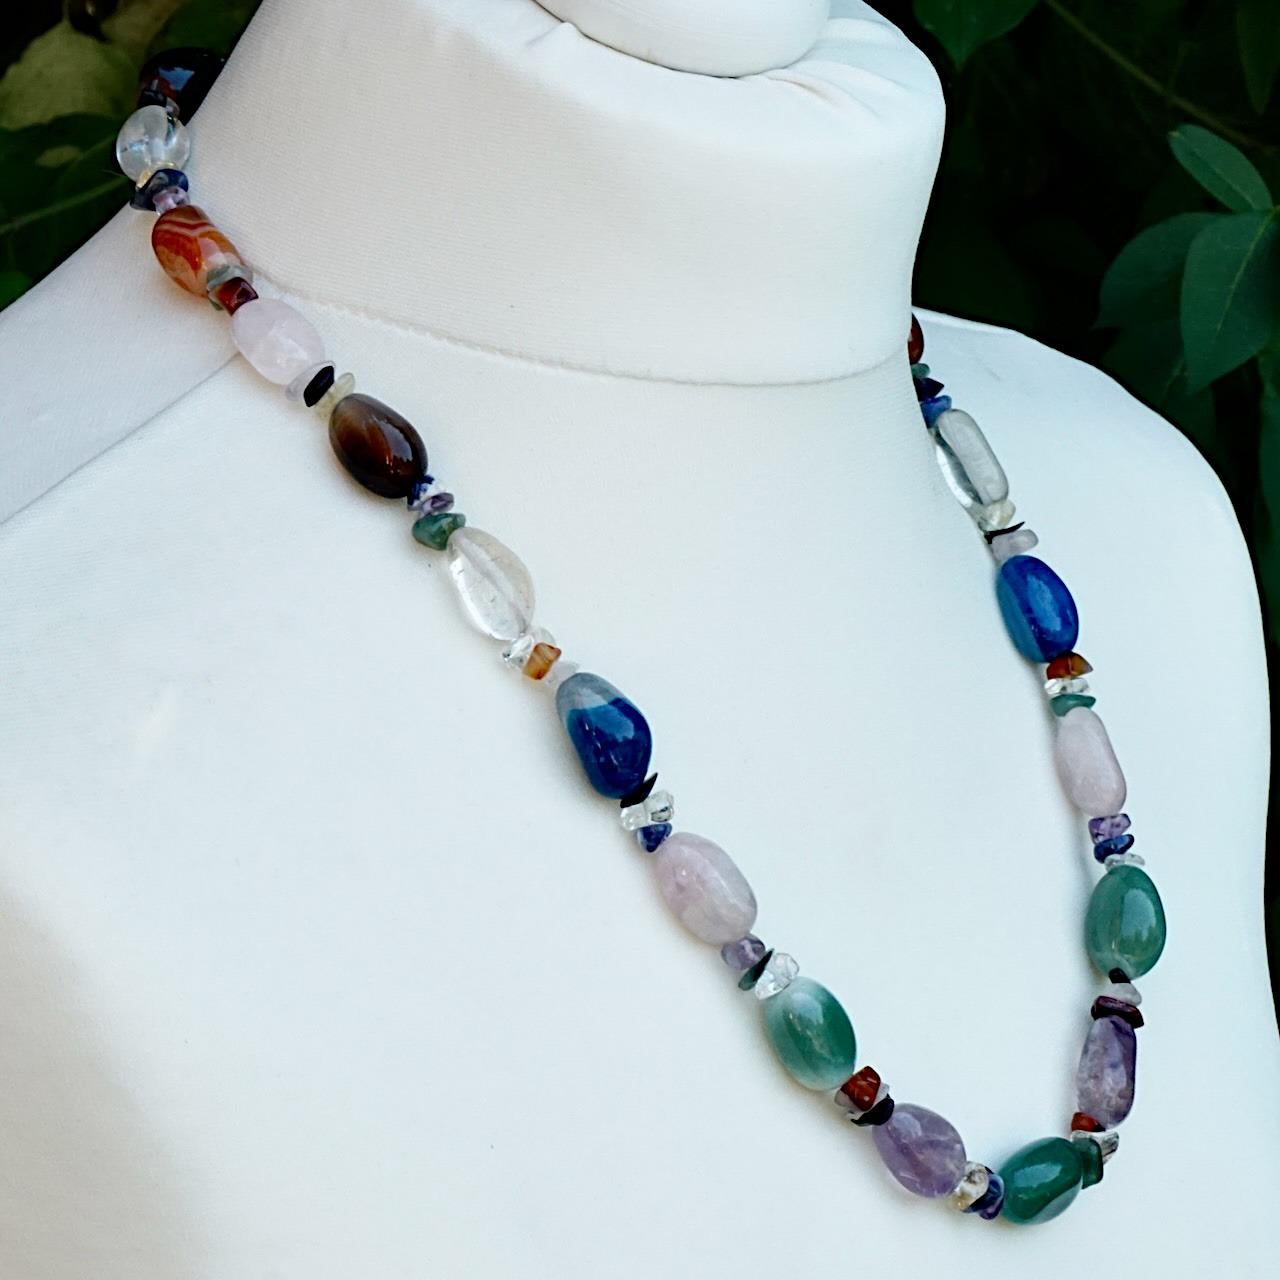 Polished Gemstone Necklace including Rose Quartz, Amethyst and Agate Beads In Good Condition For Sale In London, GB